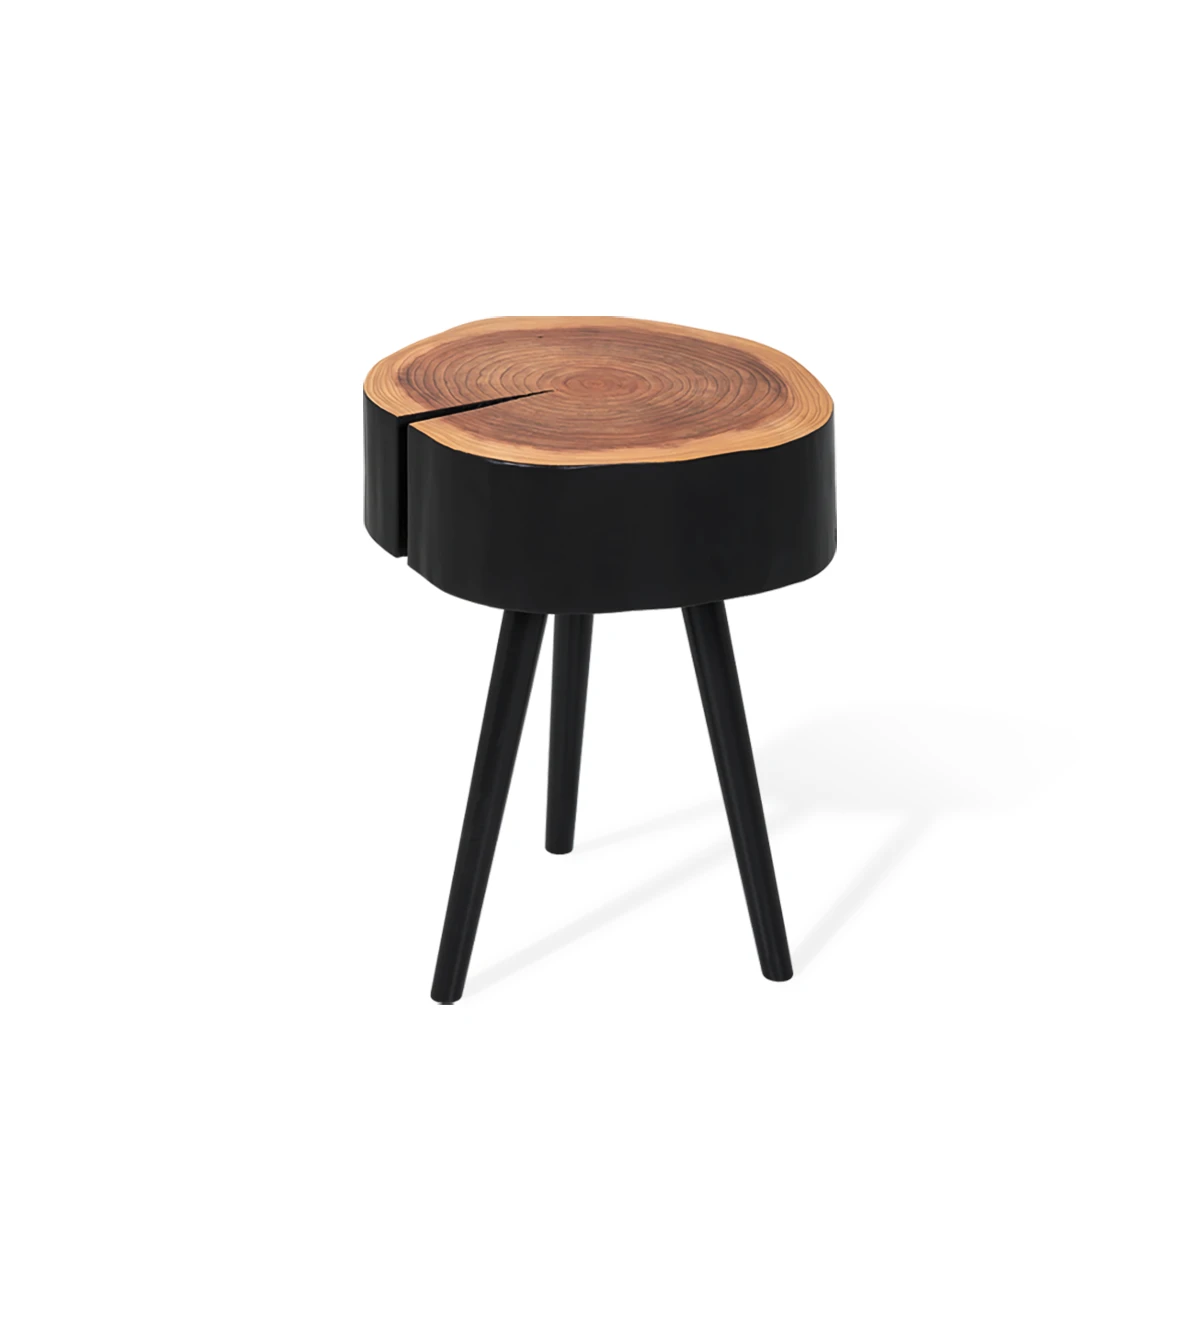 Trunk side table in natural cryptomeria wood lacquered in black, with 3 turned legs lacquered in black.